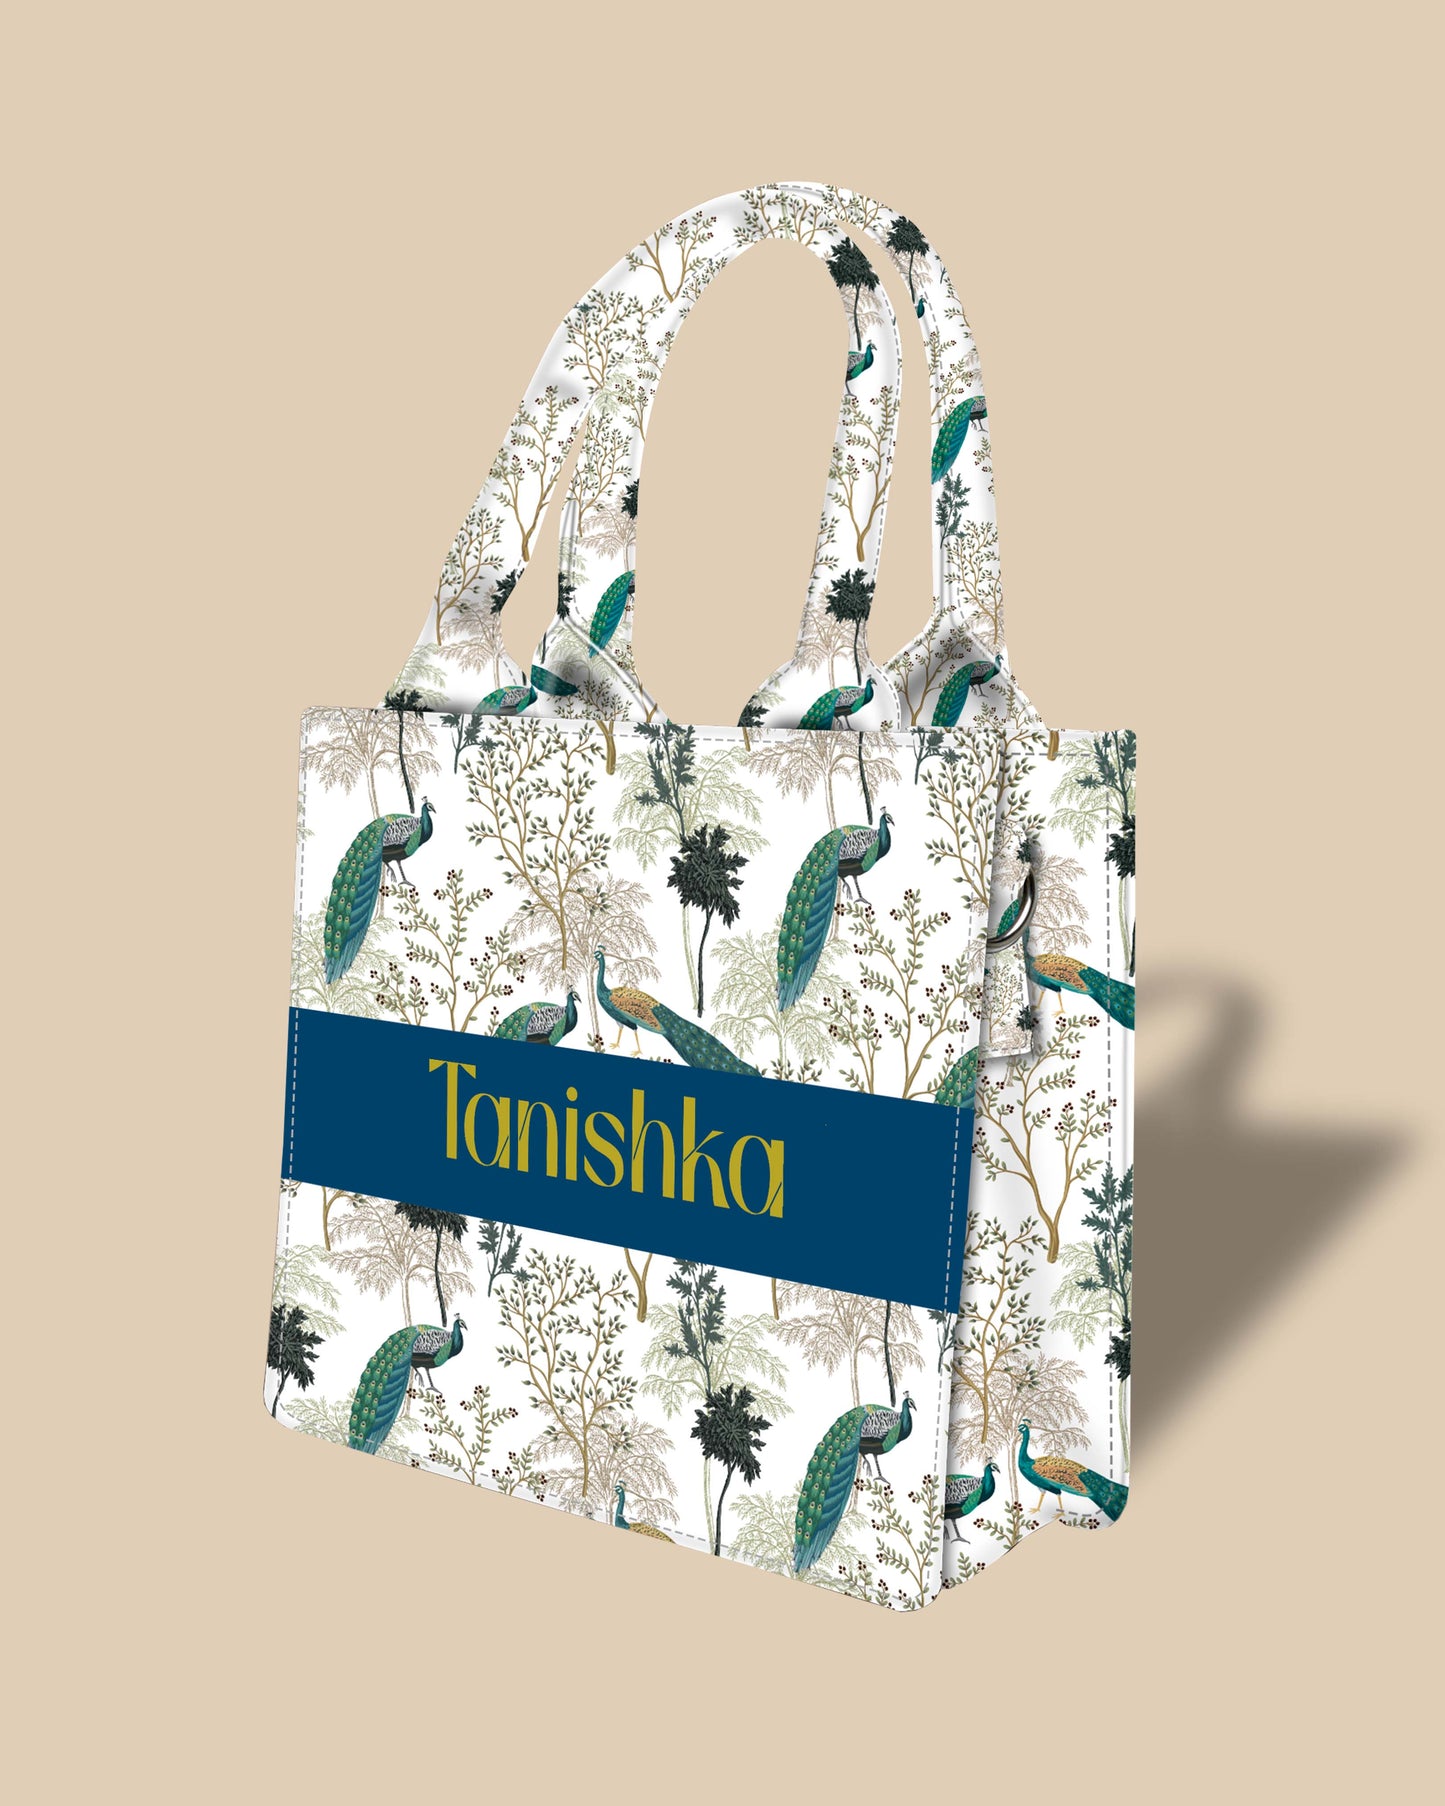 Customized Small Tote Bag Designed With Elegant Peacock And Summer Tree